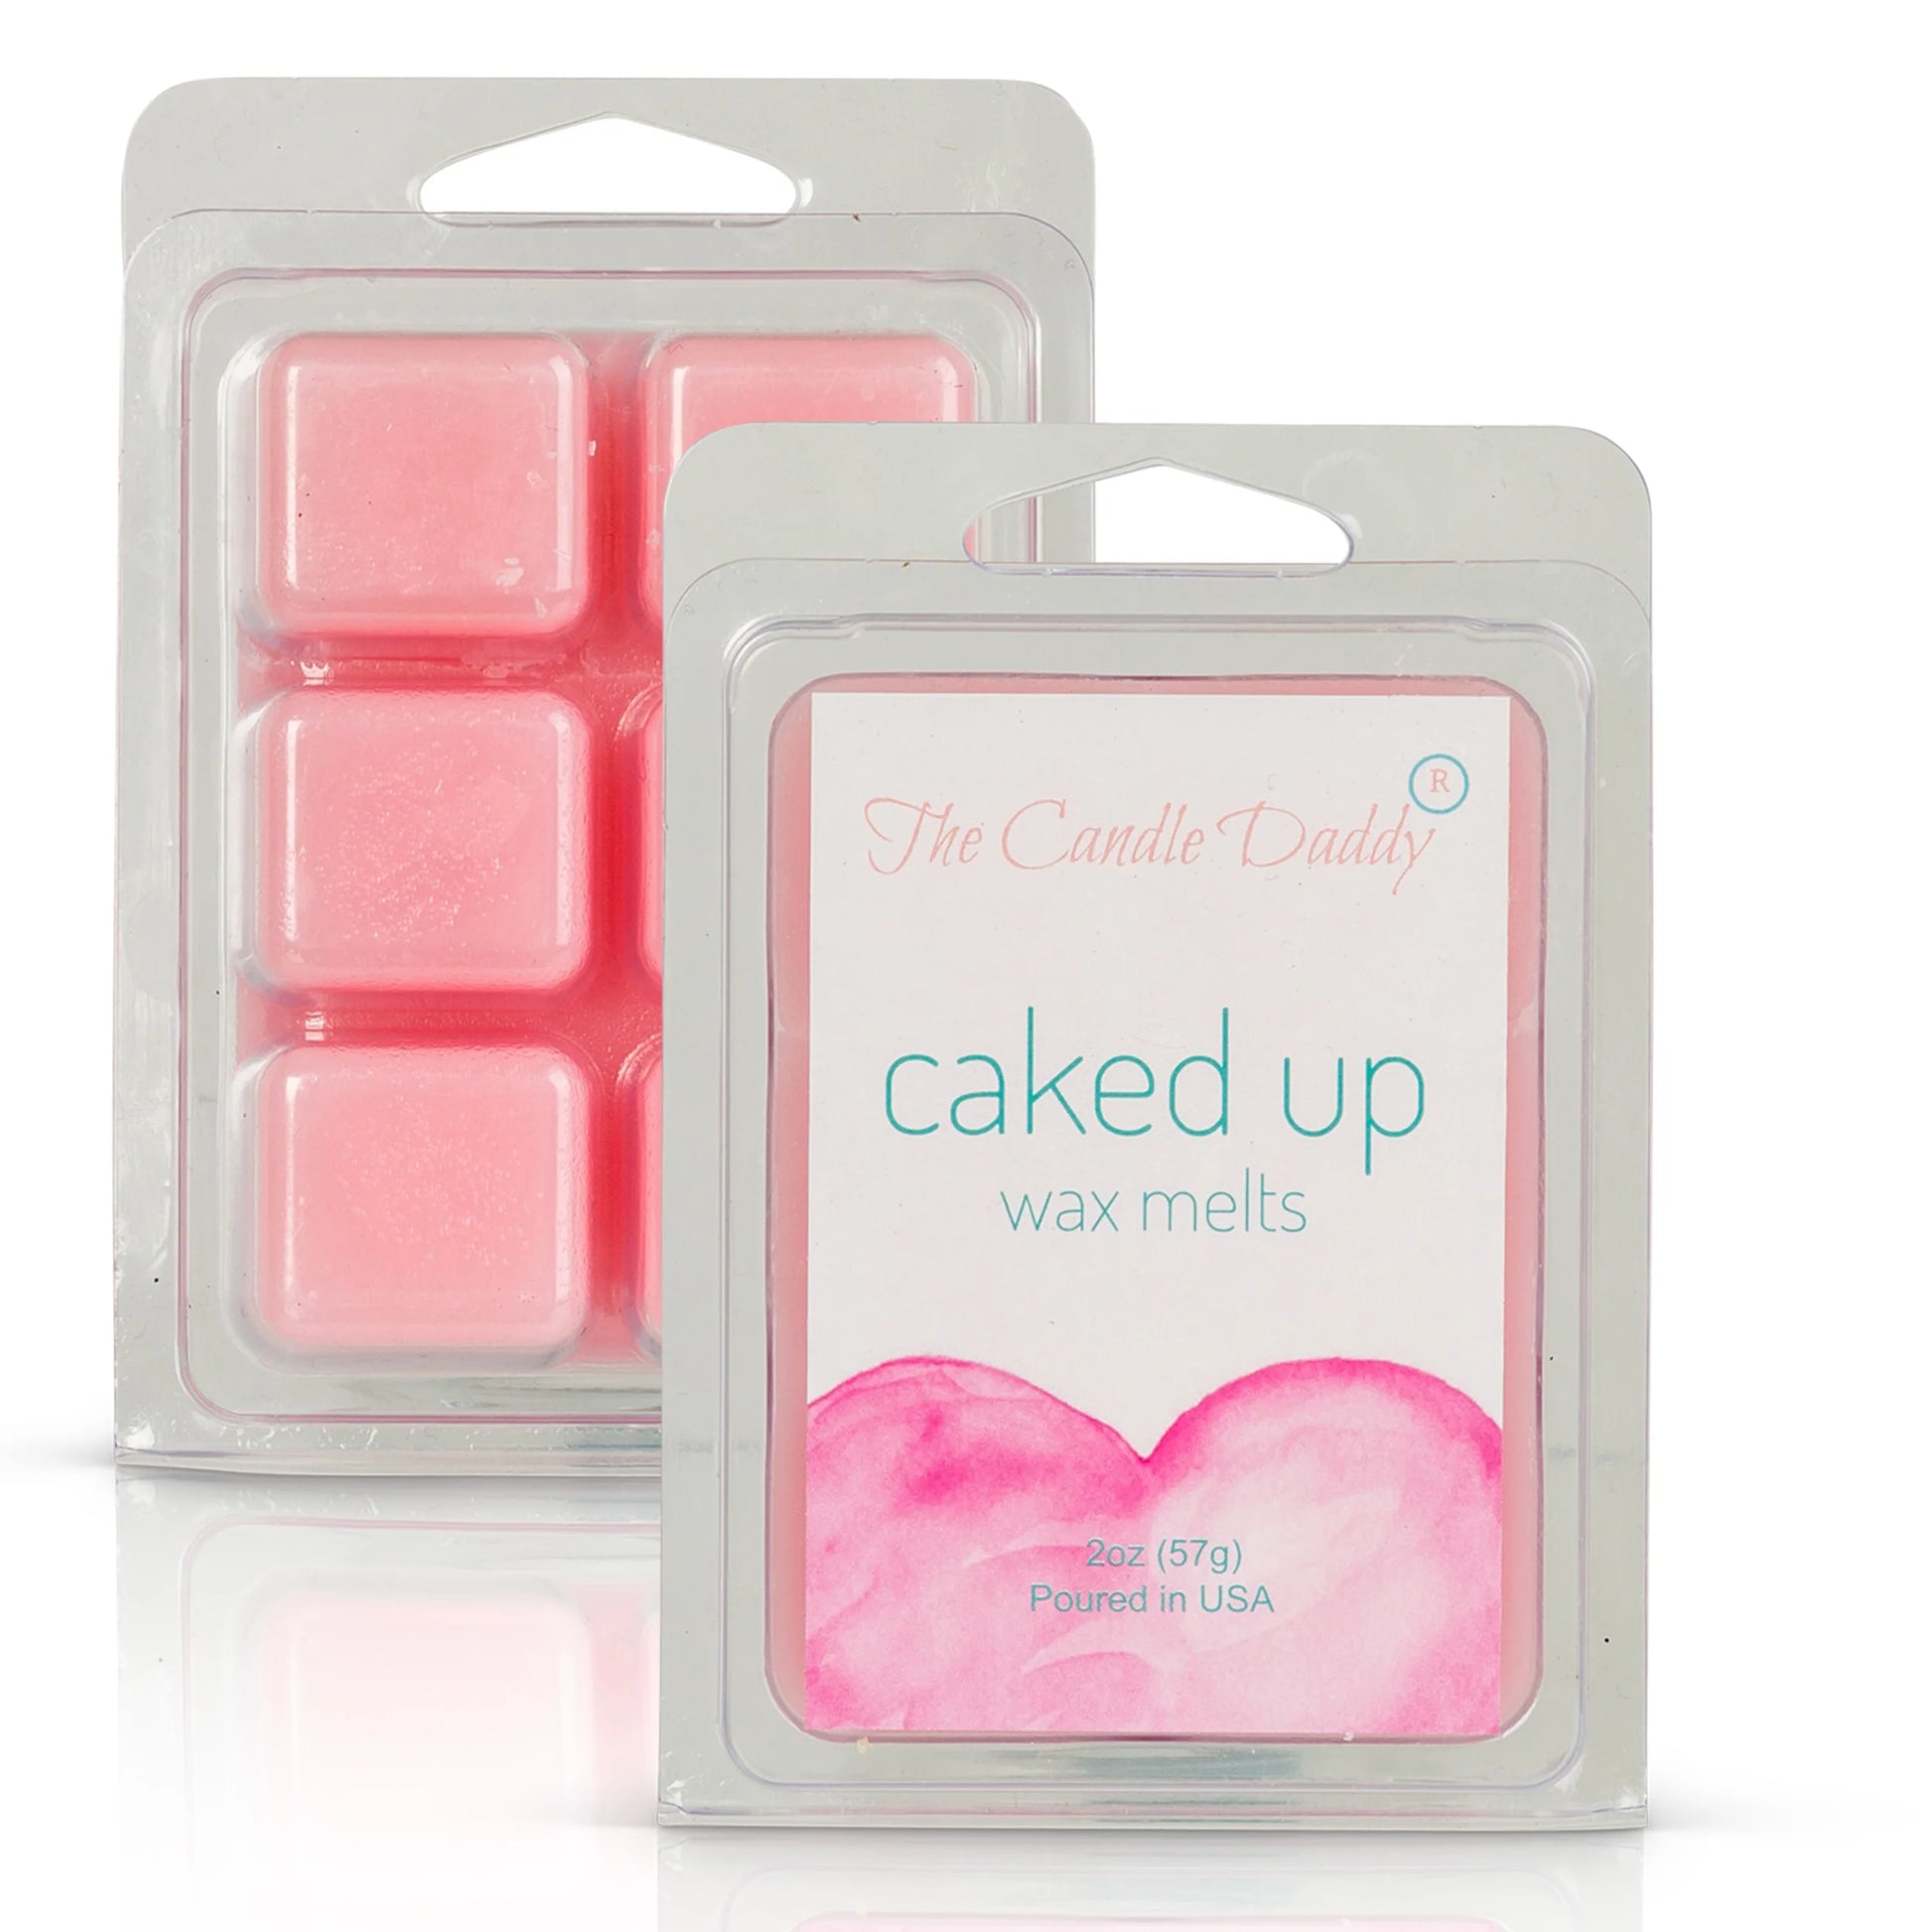 Caked Up Wax Melts